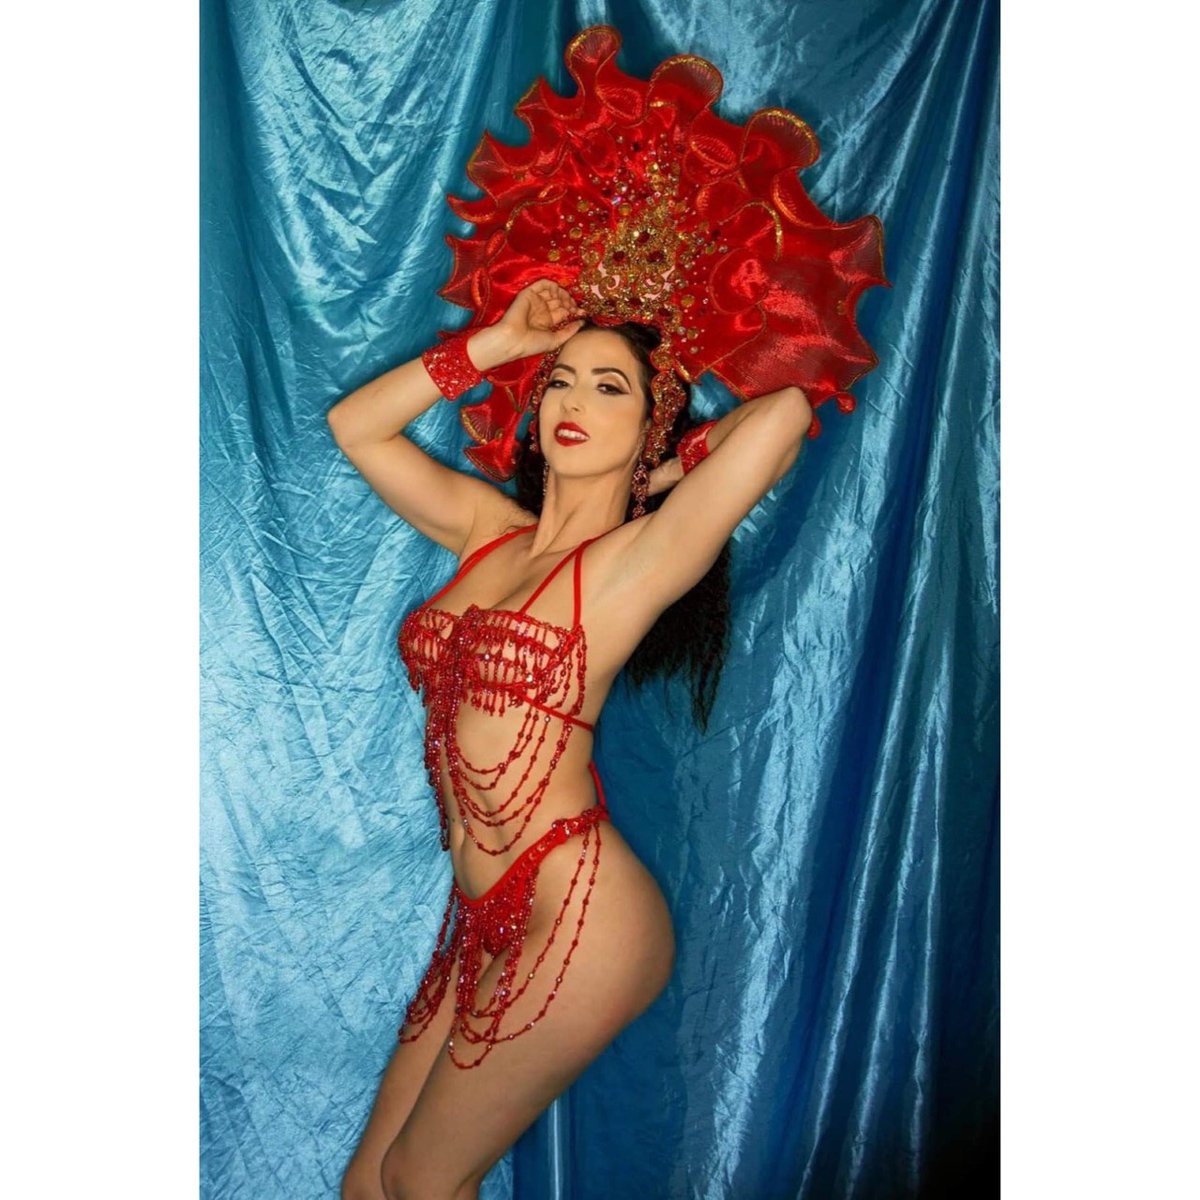 The Dirty Circus will perform a special Burlesque & Cabaret show at K-FEST on Friday 29 May! The Dirty Circus is a spectacular live show of Burlesque and Cabaret. 
.
#thedirtycircus #KFEST #KFEST2020 #Art #Arts #circus #performance